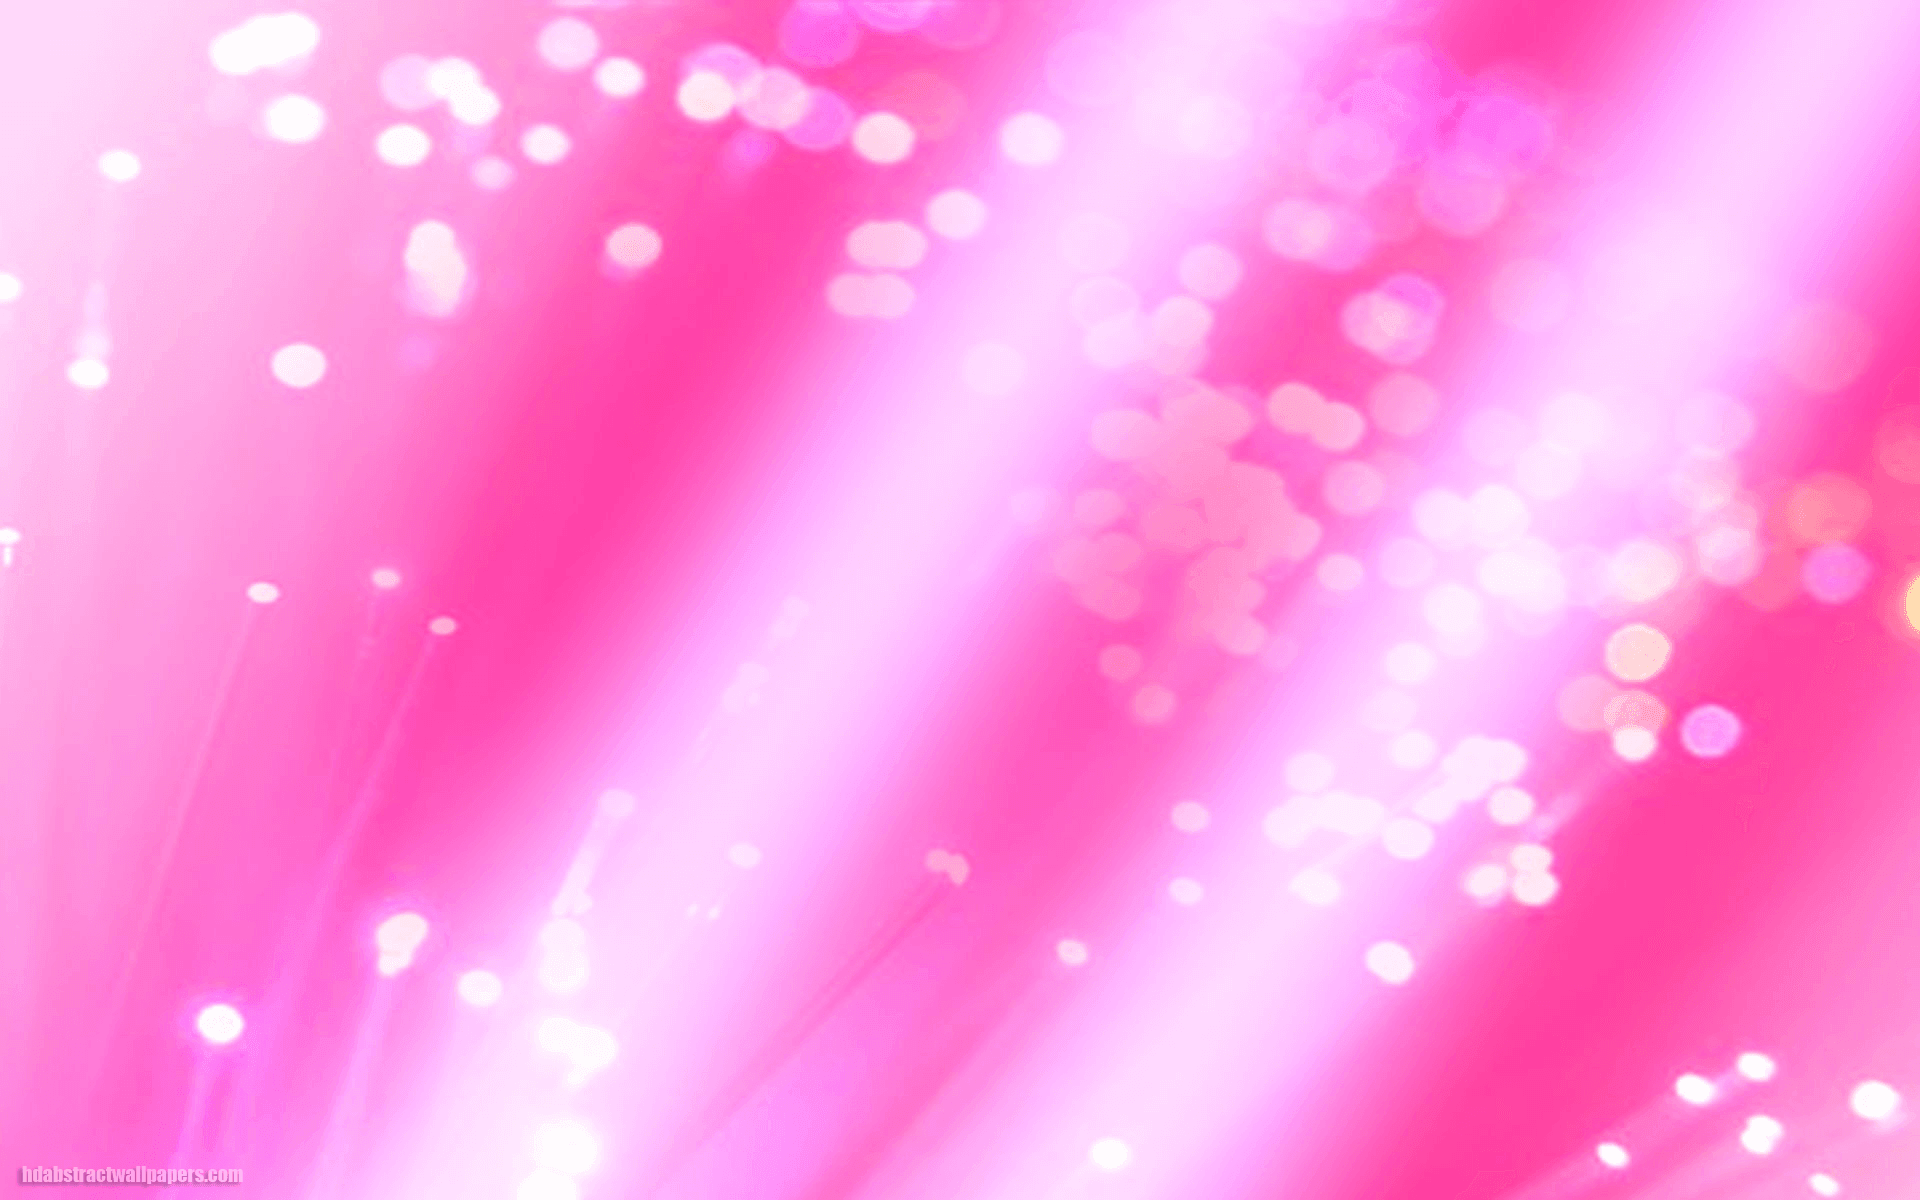 Gallery For Gt Pink Wallpaper Abstract